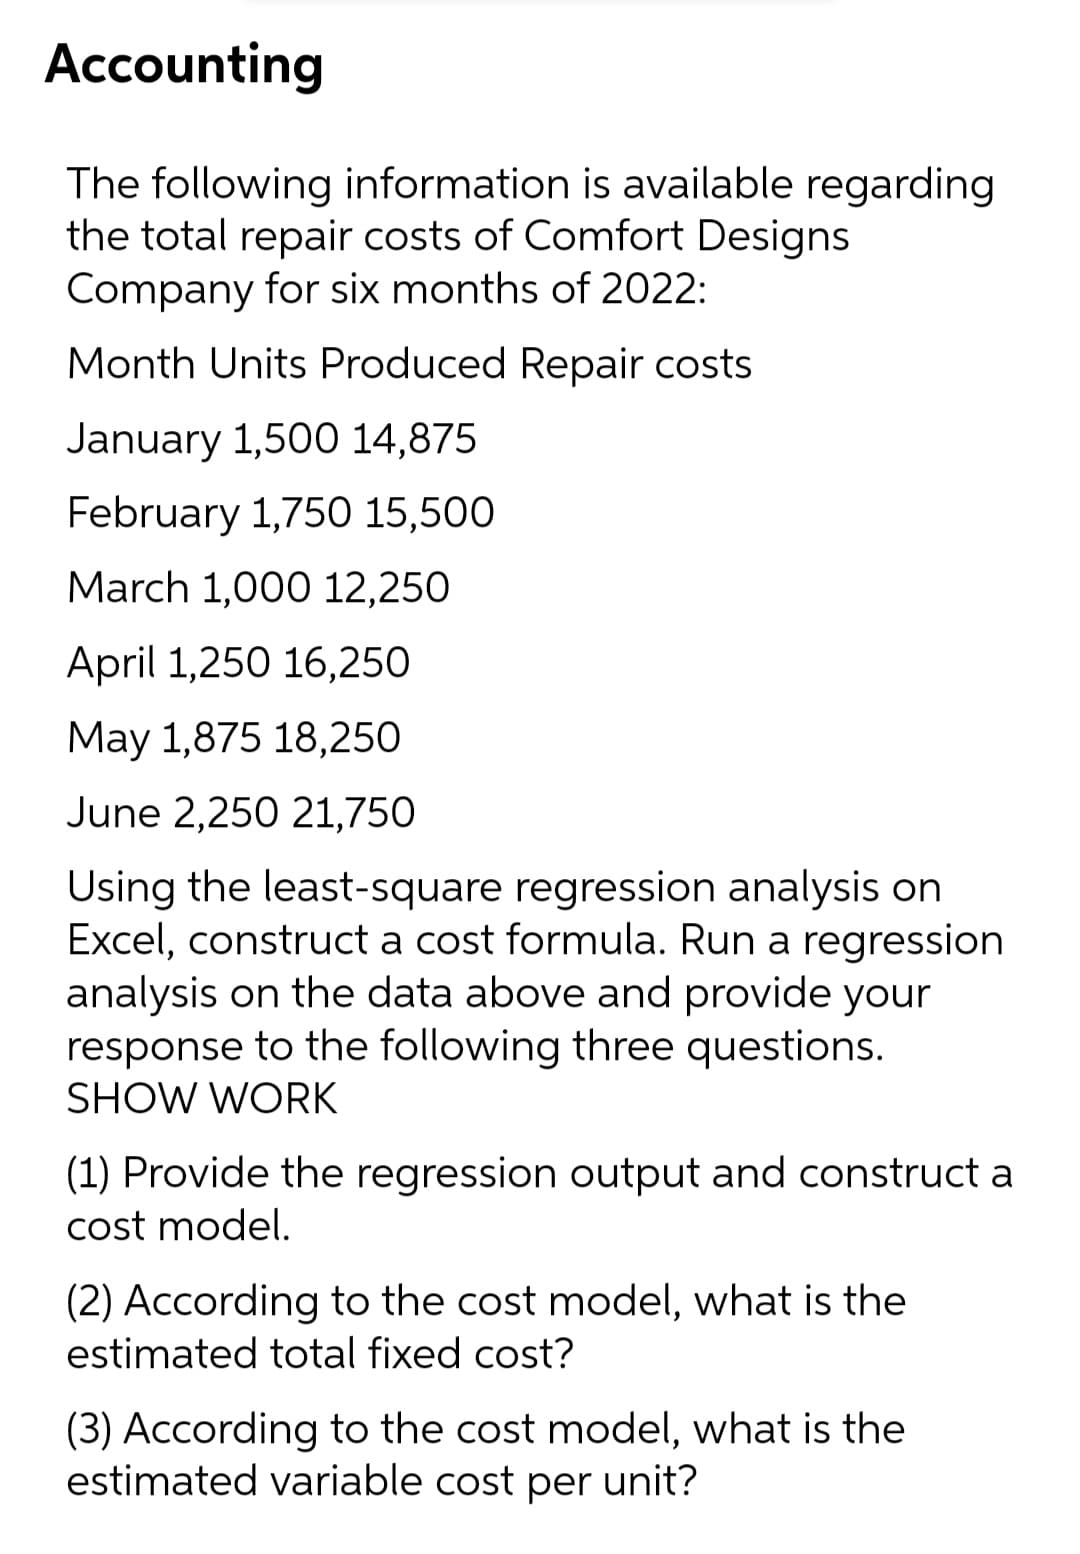 Accounting
The following information is available regarding
the total repair costs of Comfort Designs
Company for six months of 2022:
Month Units Produced Repair costs
January 1,500 14,875
February 1,750 15,500
March 1,000 12,250
April 1,250 16,250
May 1,875 18,250
June 2,250 21,750
Using the least-square regression analysis on
Excel, construct a cost formula. Run a regression
analysis on the data above and provide your
response to the following three questions.
SHOW WORK
(1) Provide the regression output and construct a
cost model.
(2) According to the cost model, what is the
estimated total fixed cost?
(3) According to the cost model, what is the
estimated variable cost per unit?
